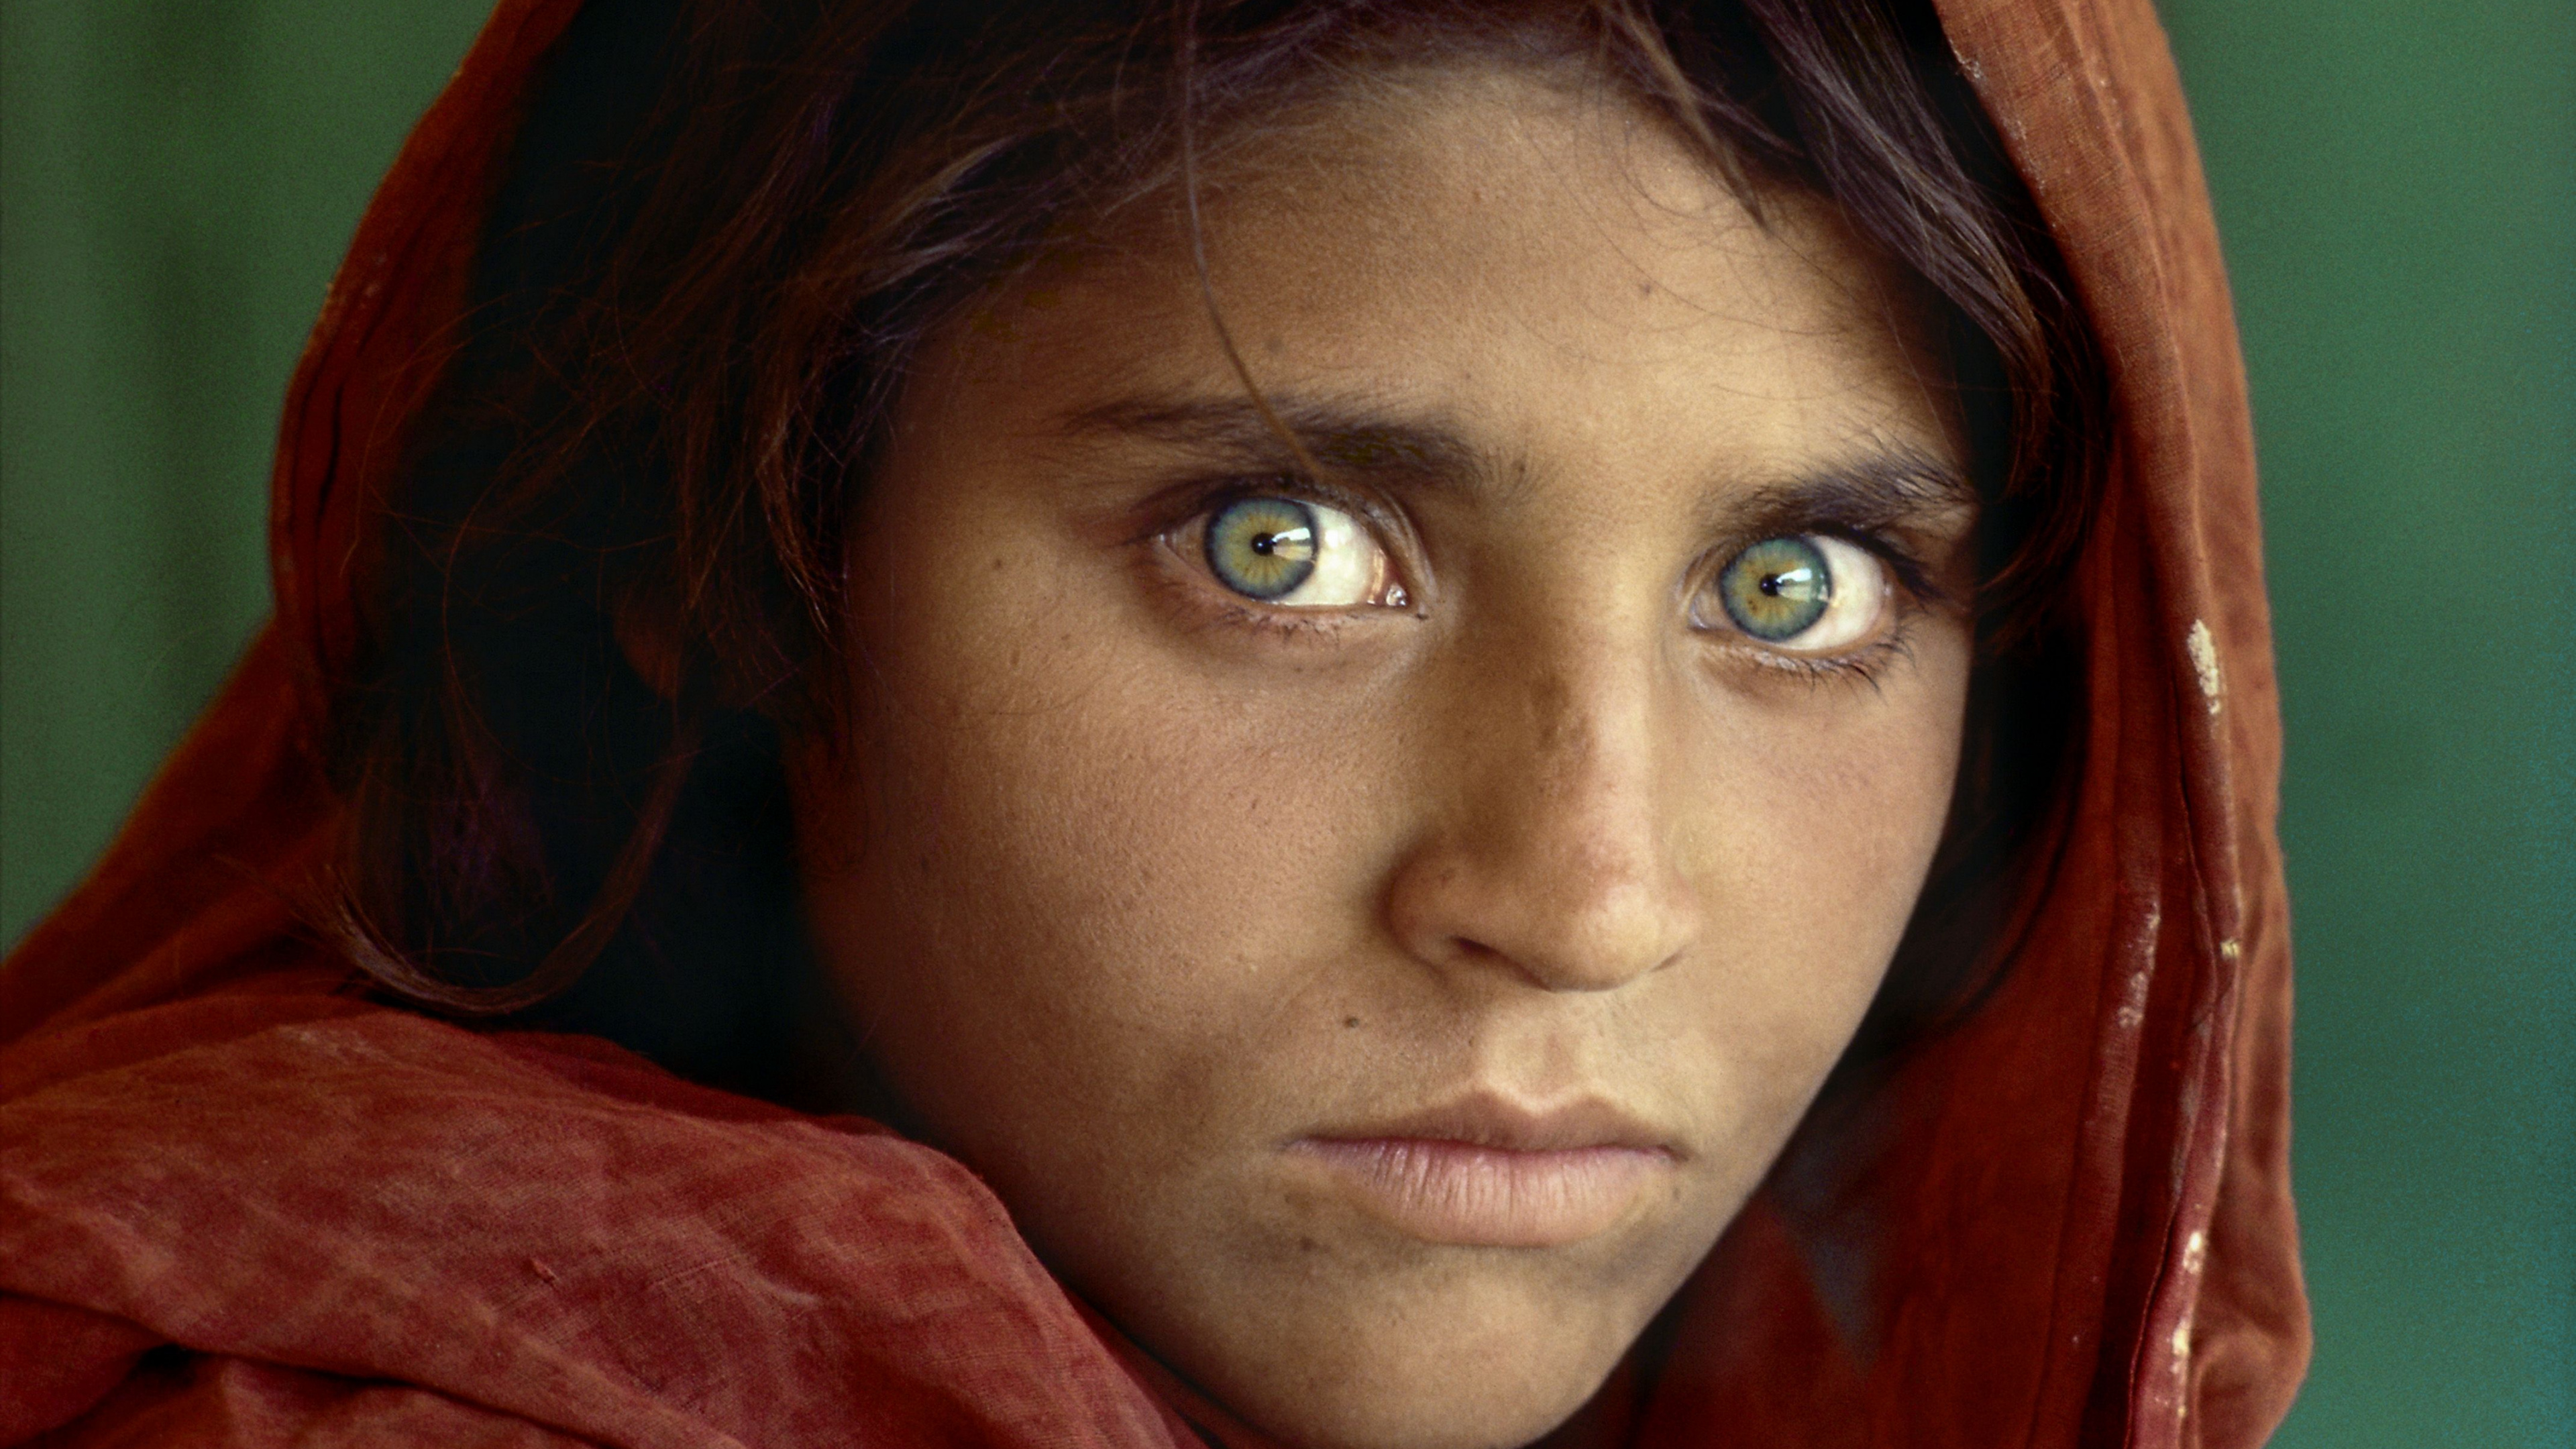 Afghan Girl, Afghanistan, National Geographic, Face, Eye. Wallpaper in 3840x2160 Resolution